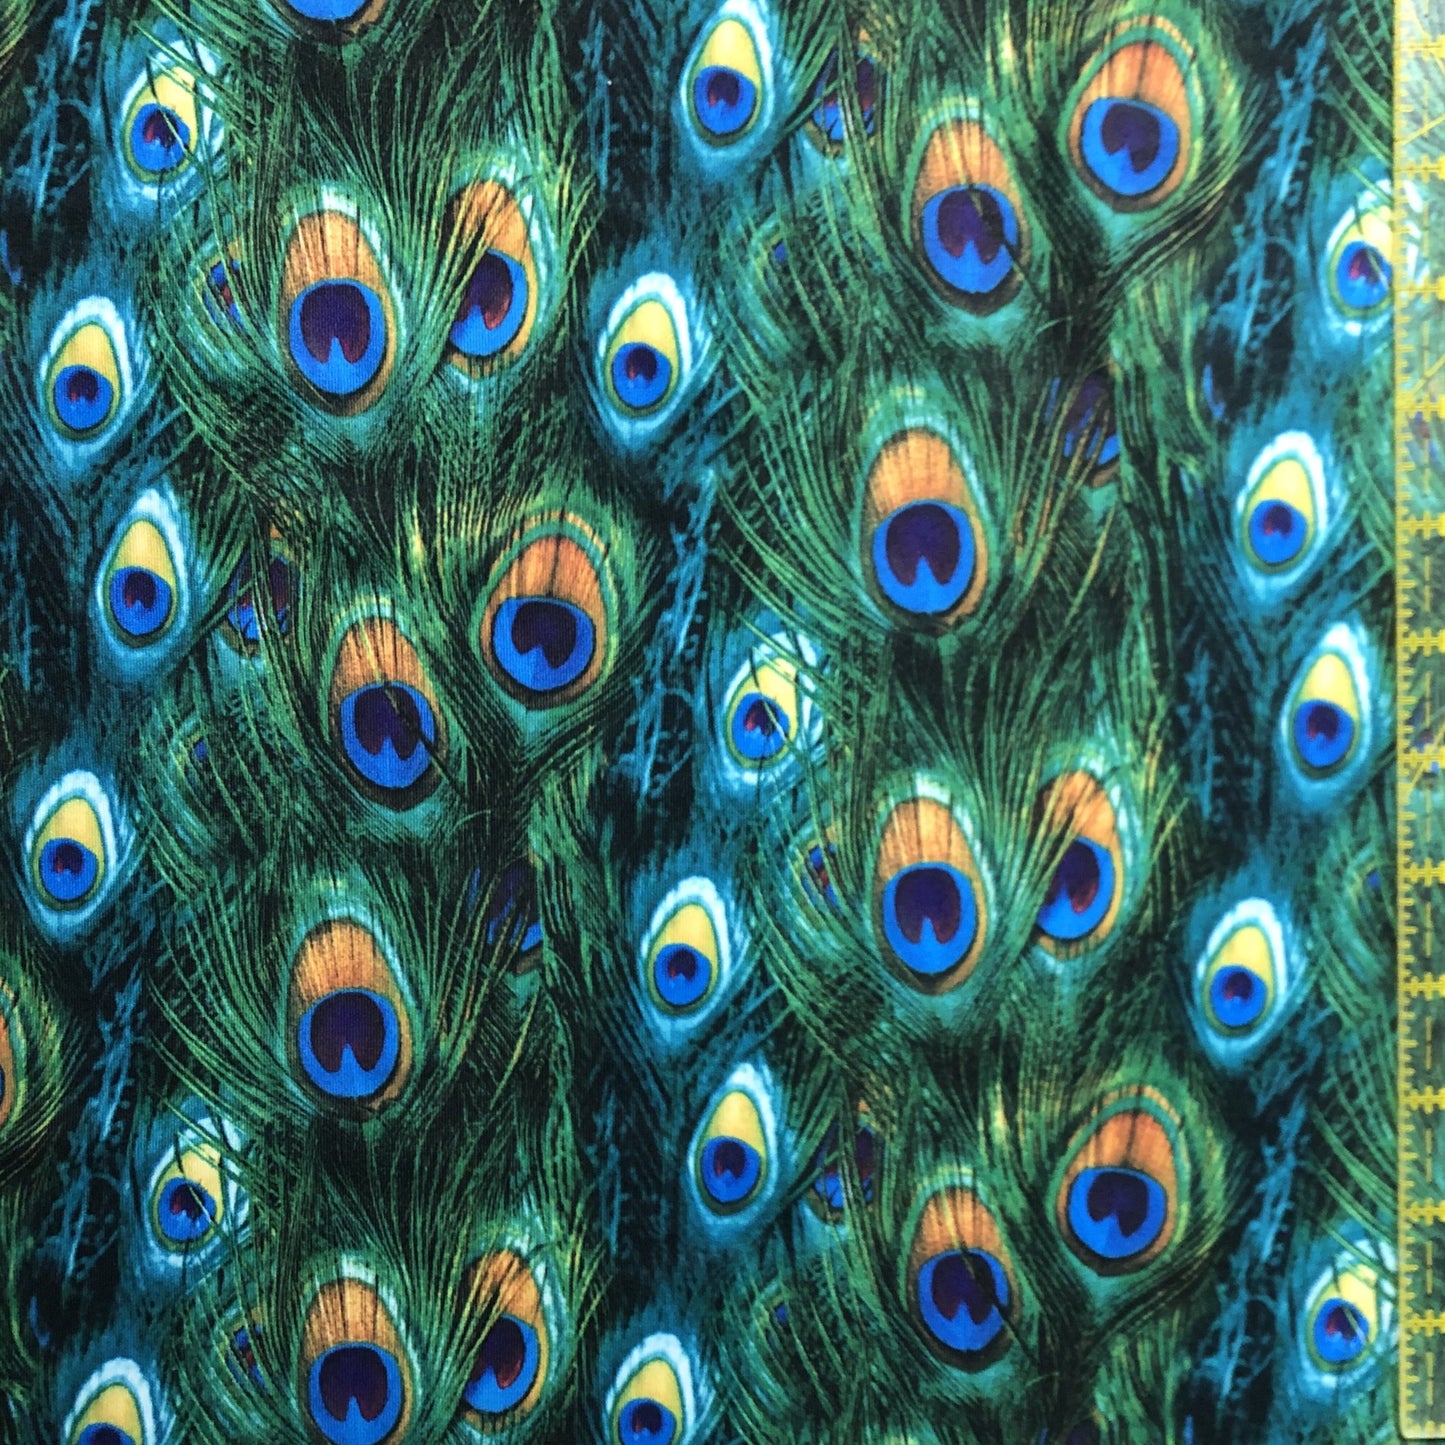 Peacock Feathers (Symes)